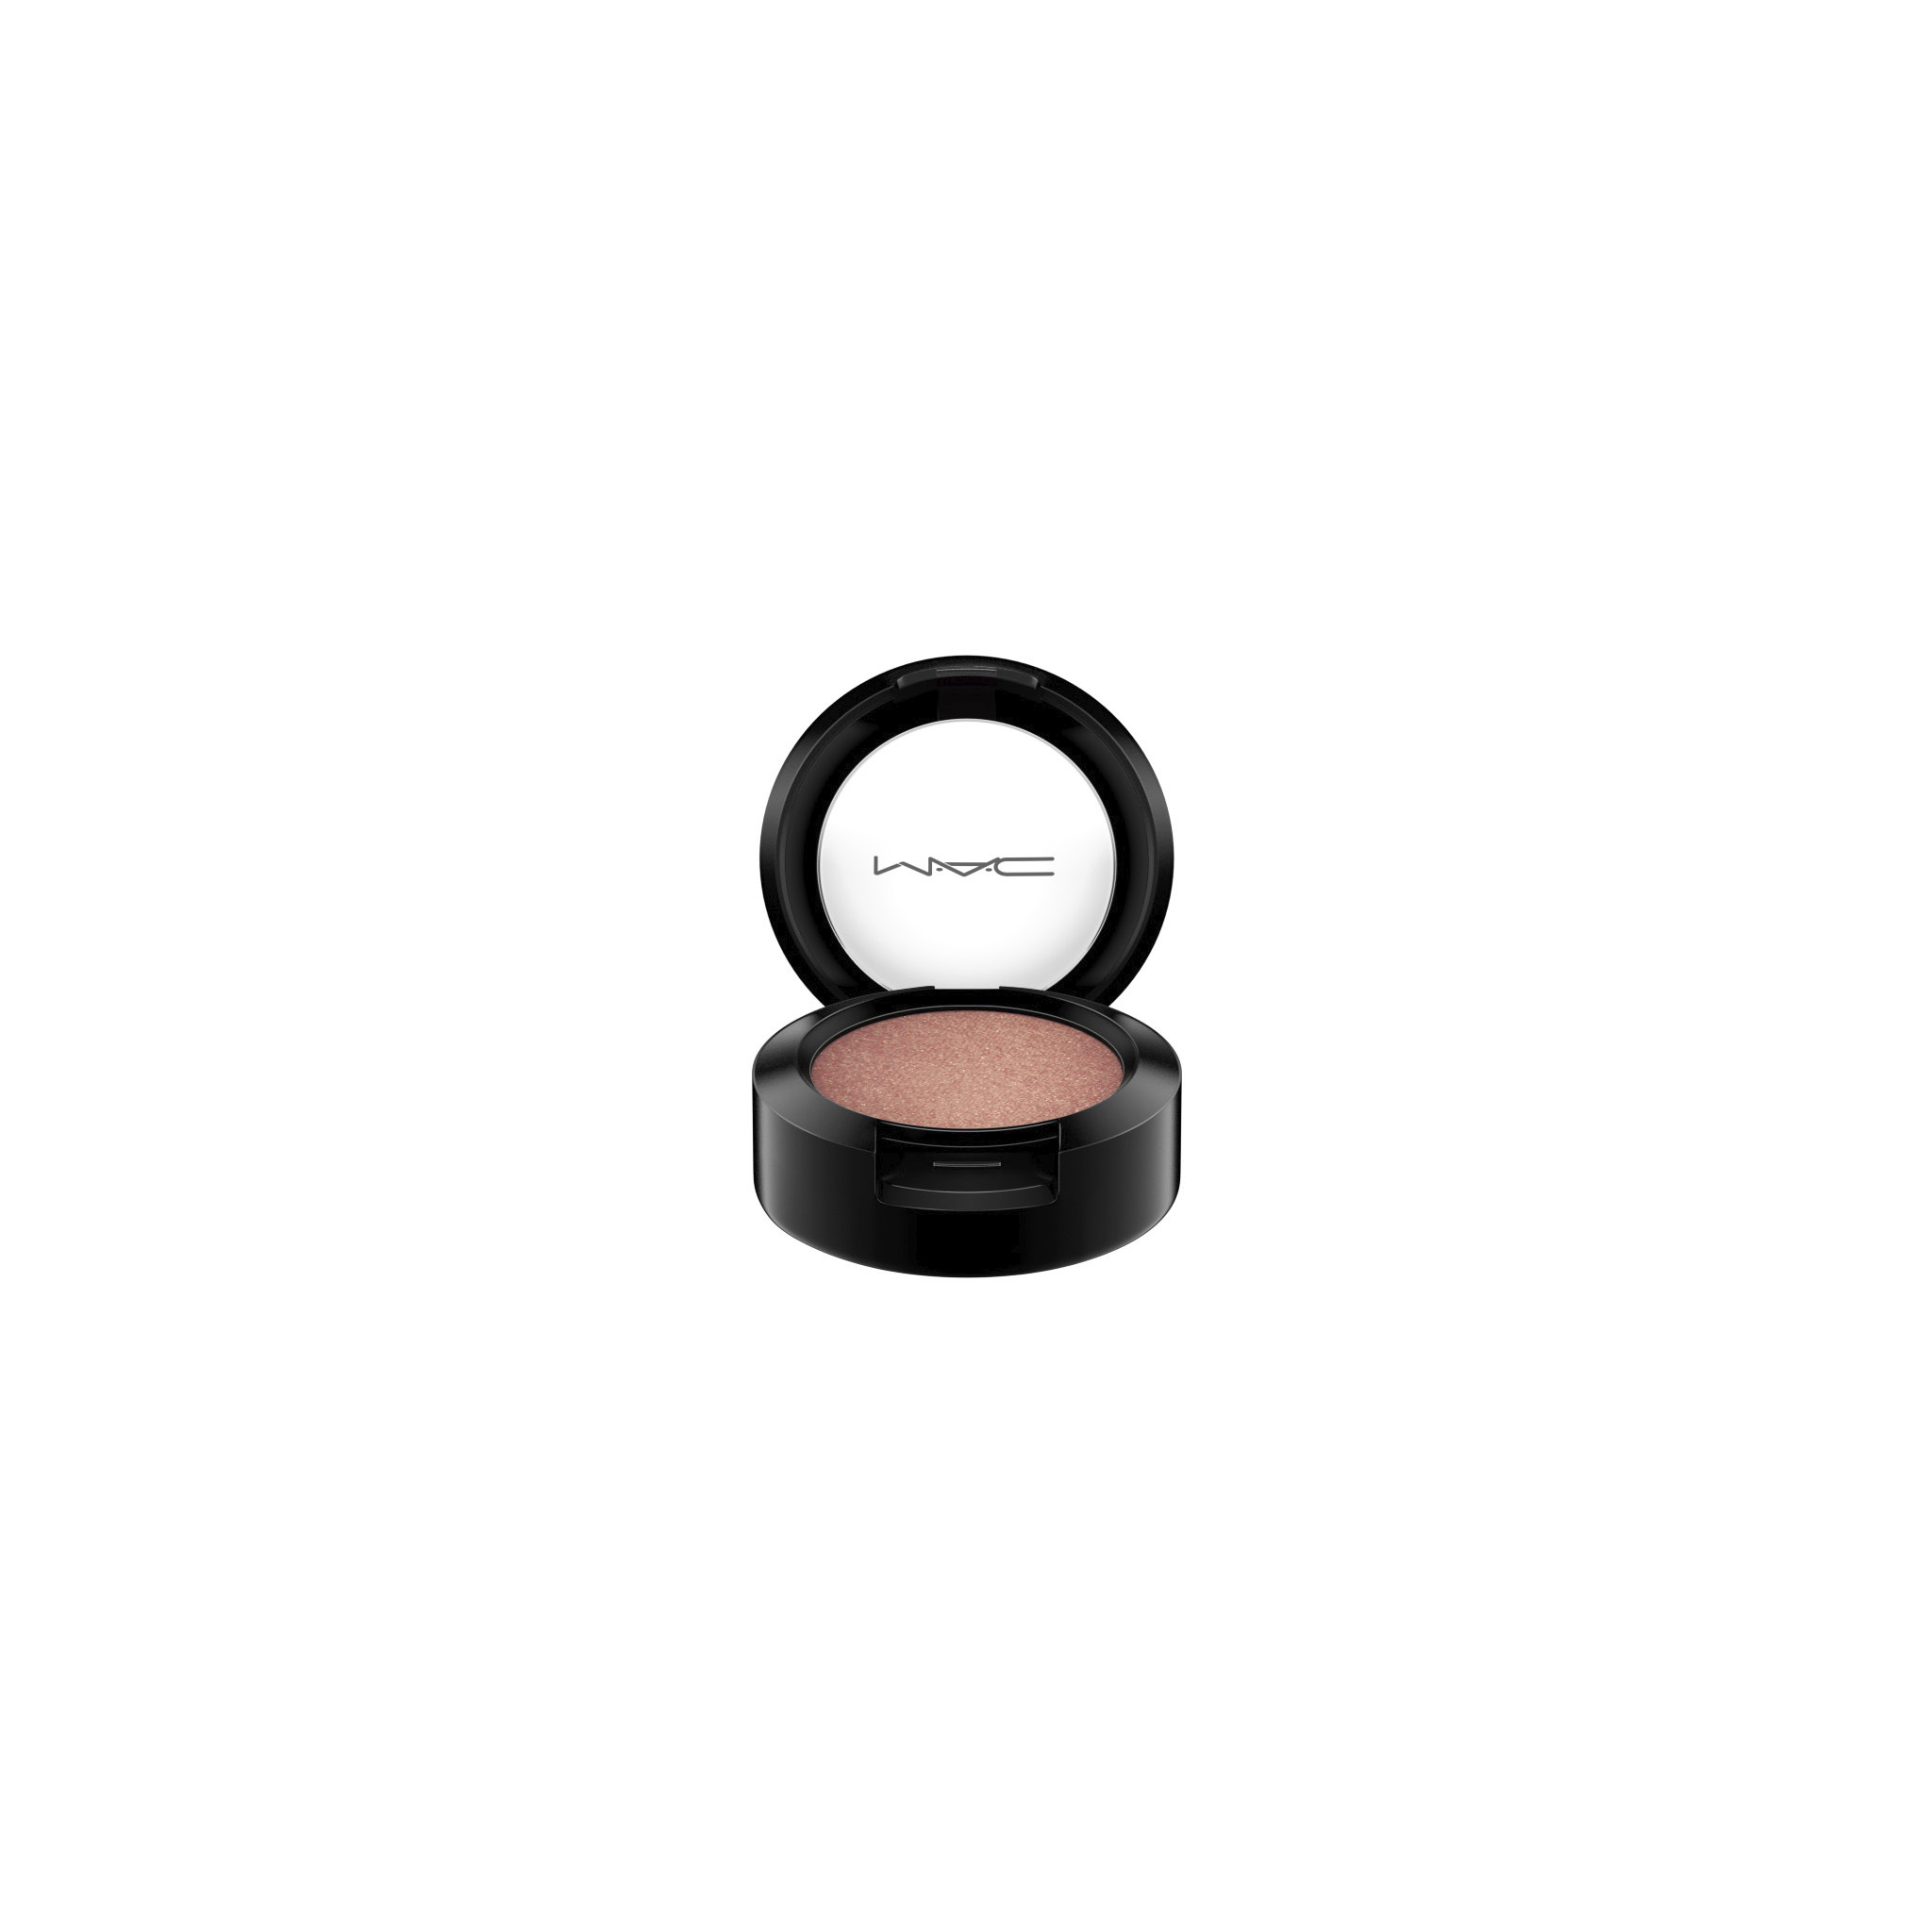  Veluxe Pearl Eye Shadow, Expensive Pink